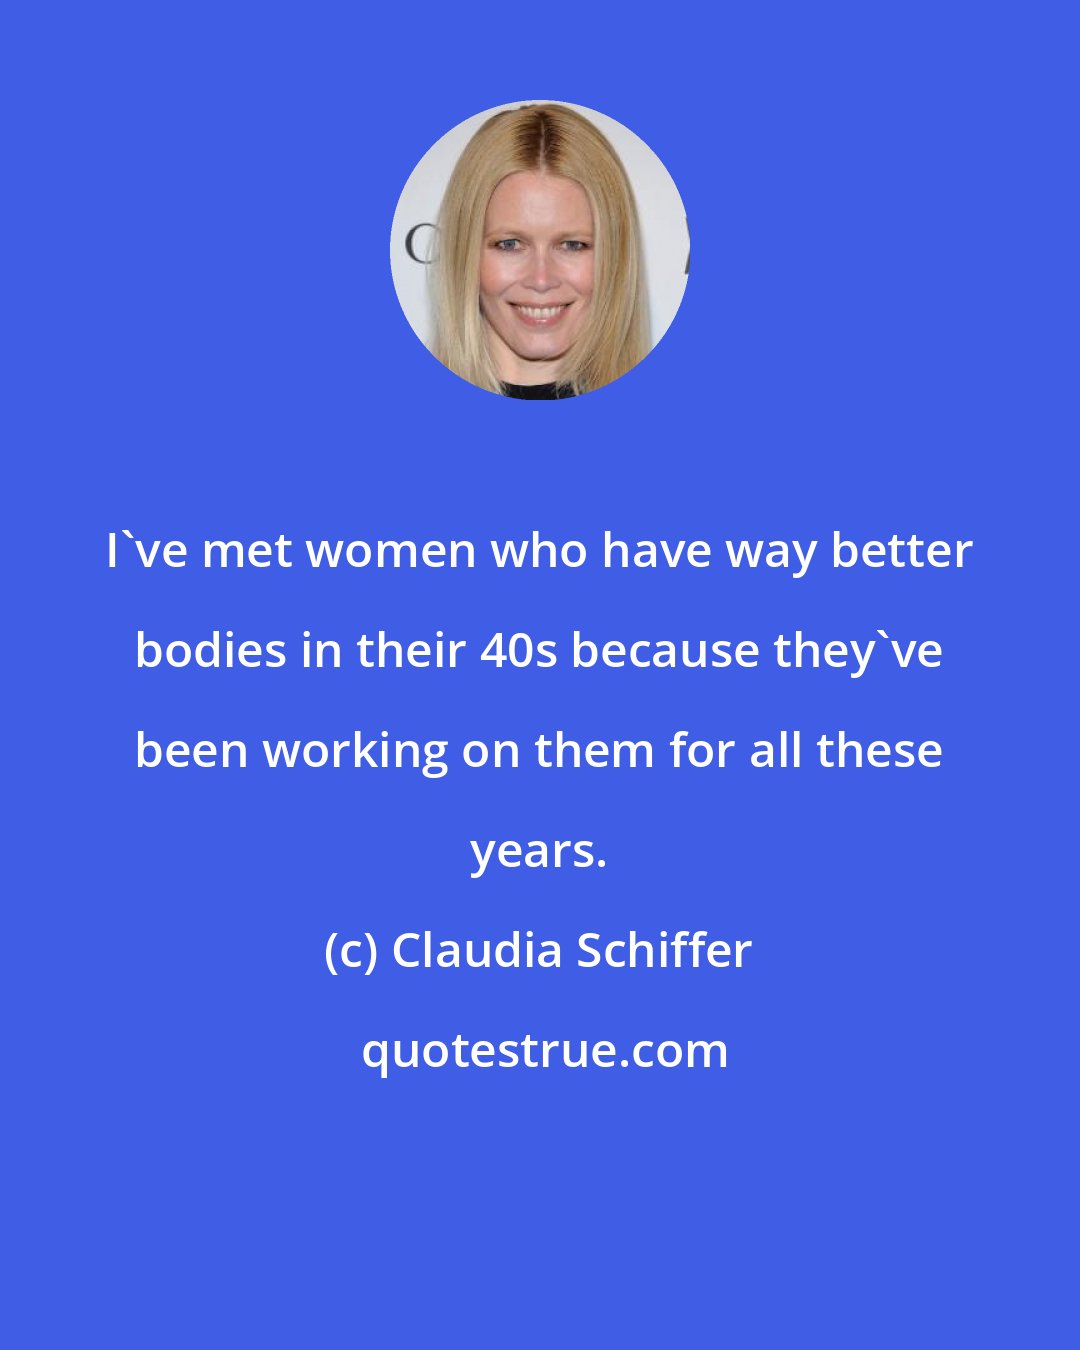 Claudia Schiffer: I've met women who have way better bodies in their 40s because they've been working on them for all these years.